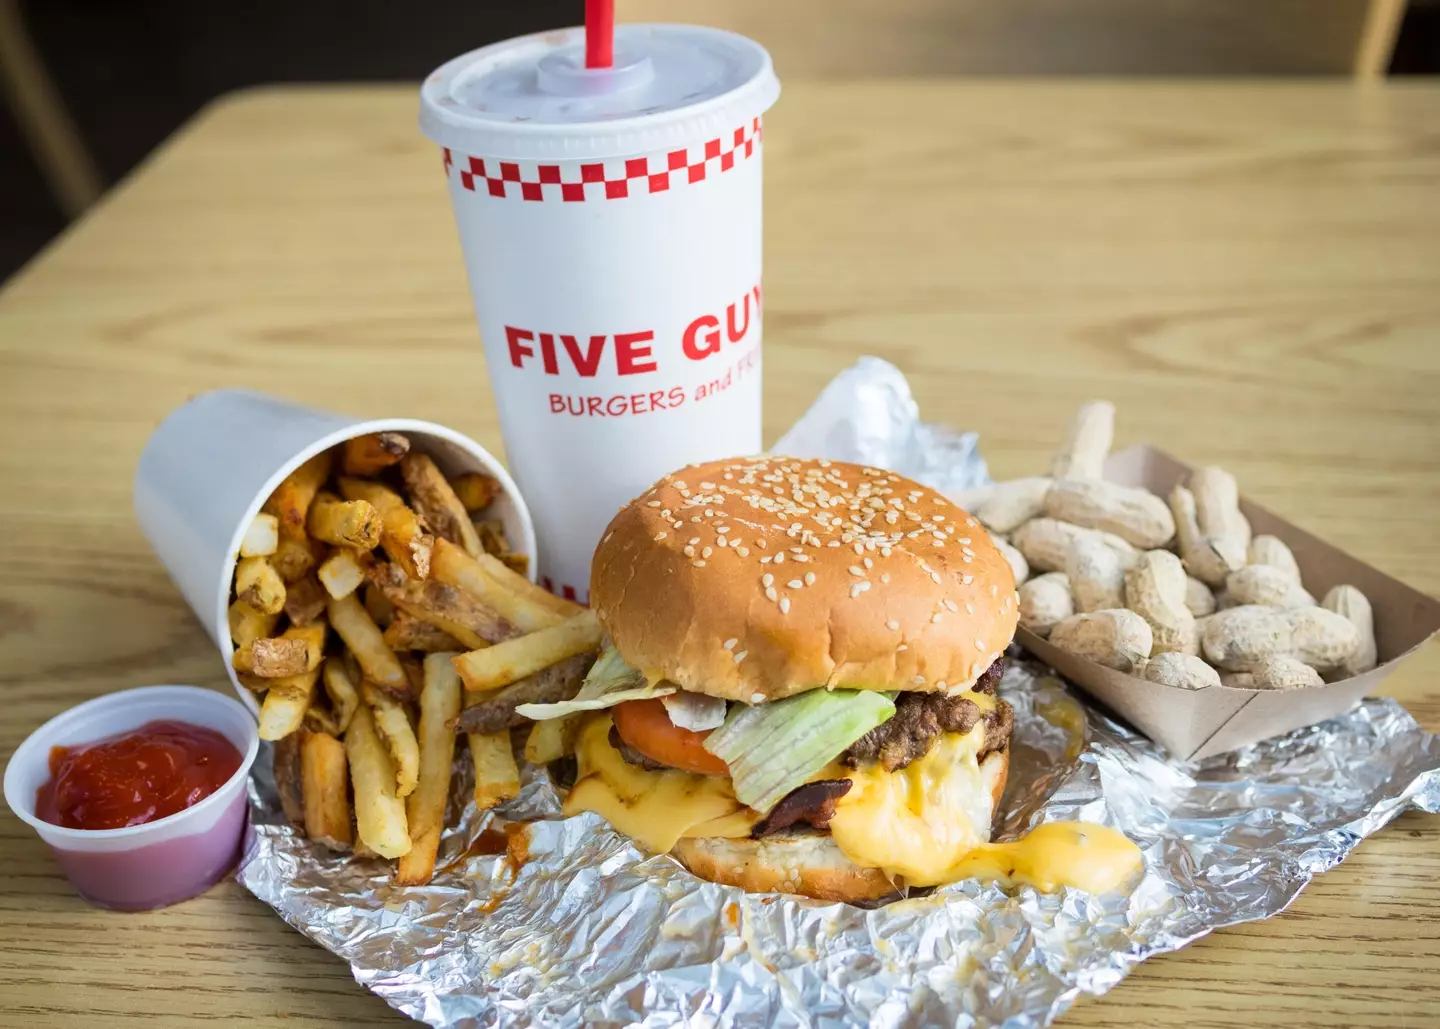 No matter what size meal you order, you’ll always get a ‘topper’ of fries added on at Five Guys.